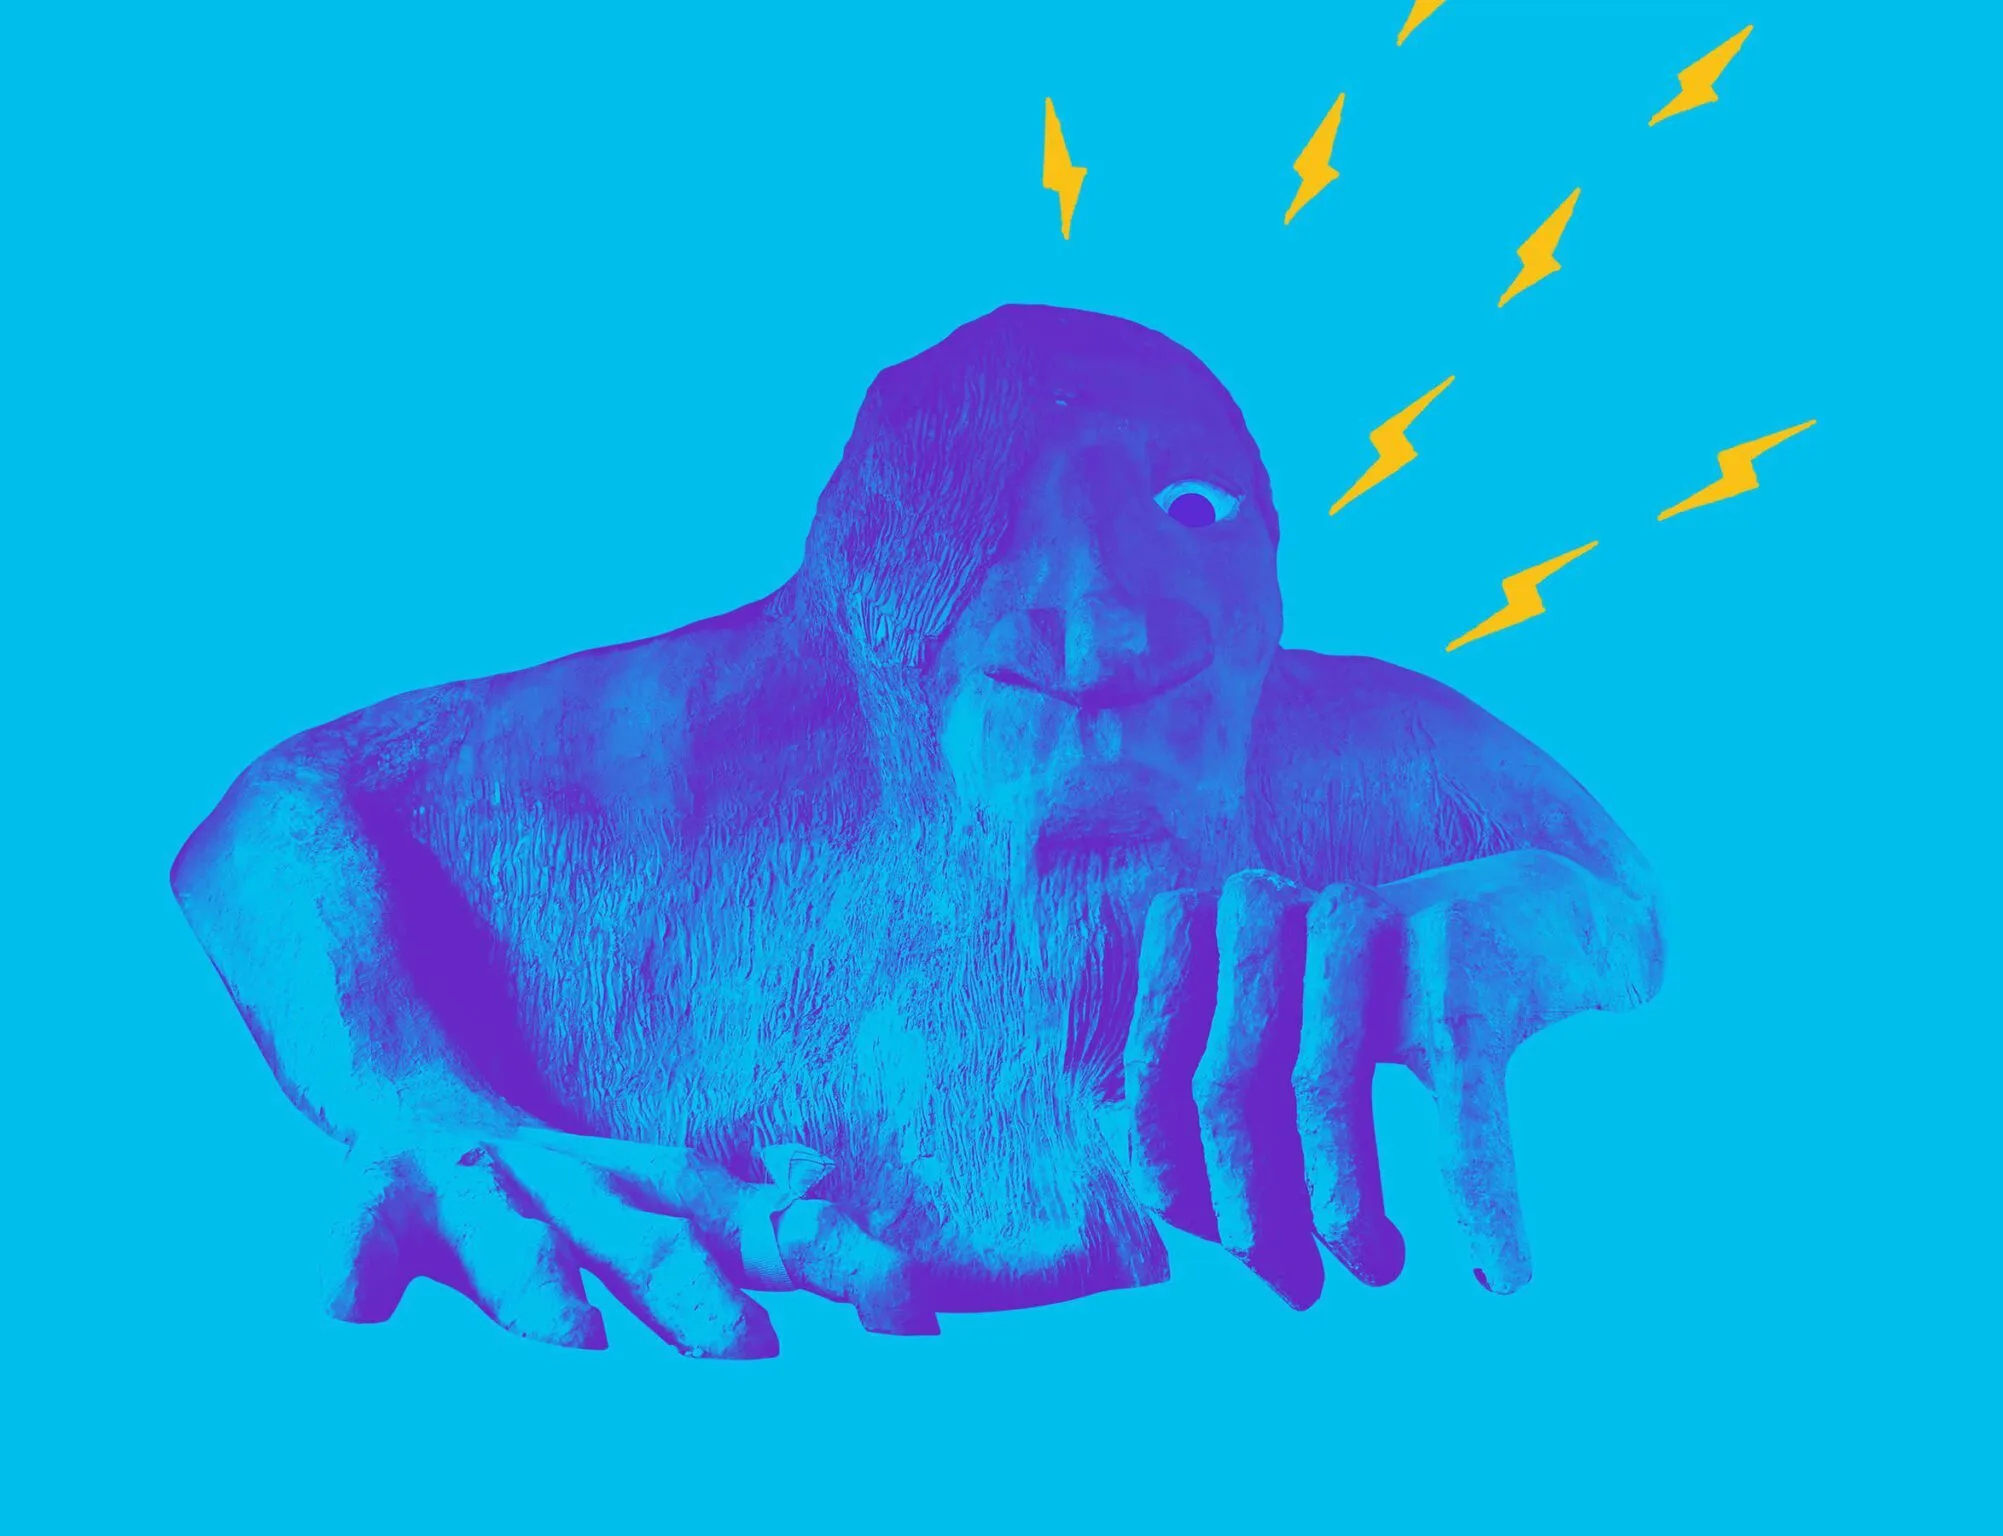 Poster for Lydia and The Troll. It shows the Fremont Troll on a blue background